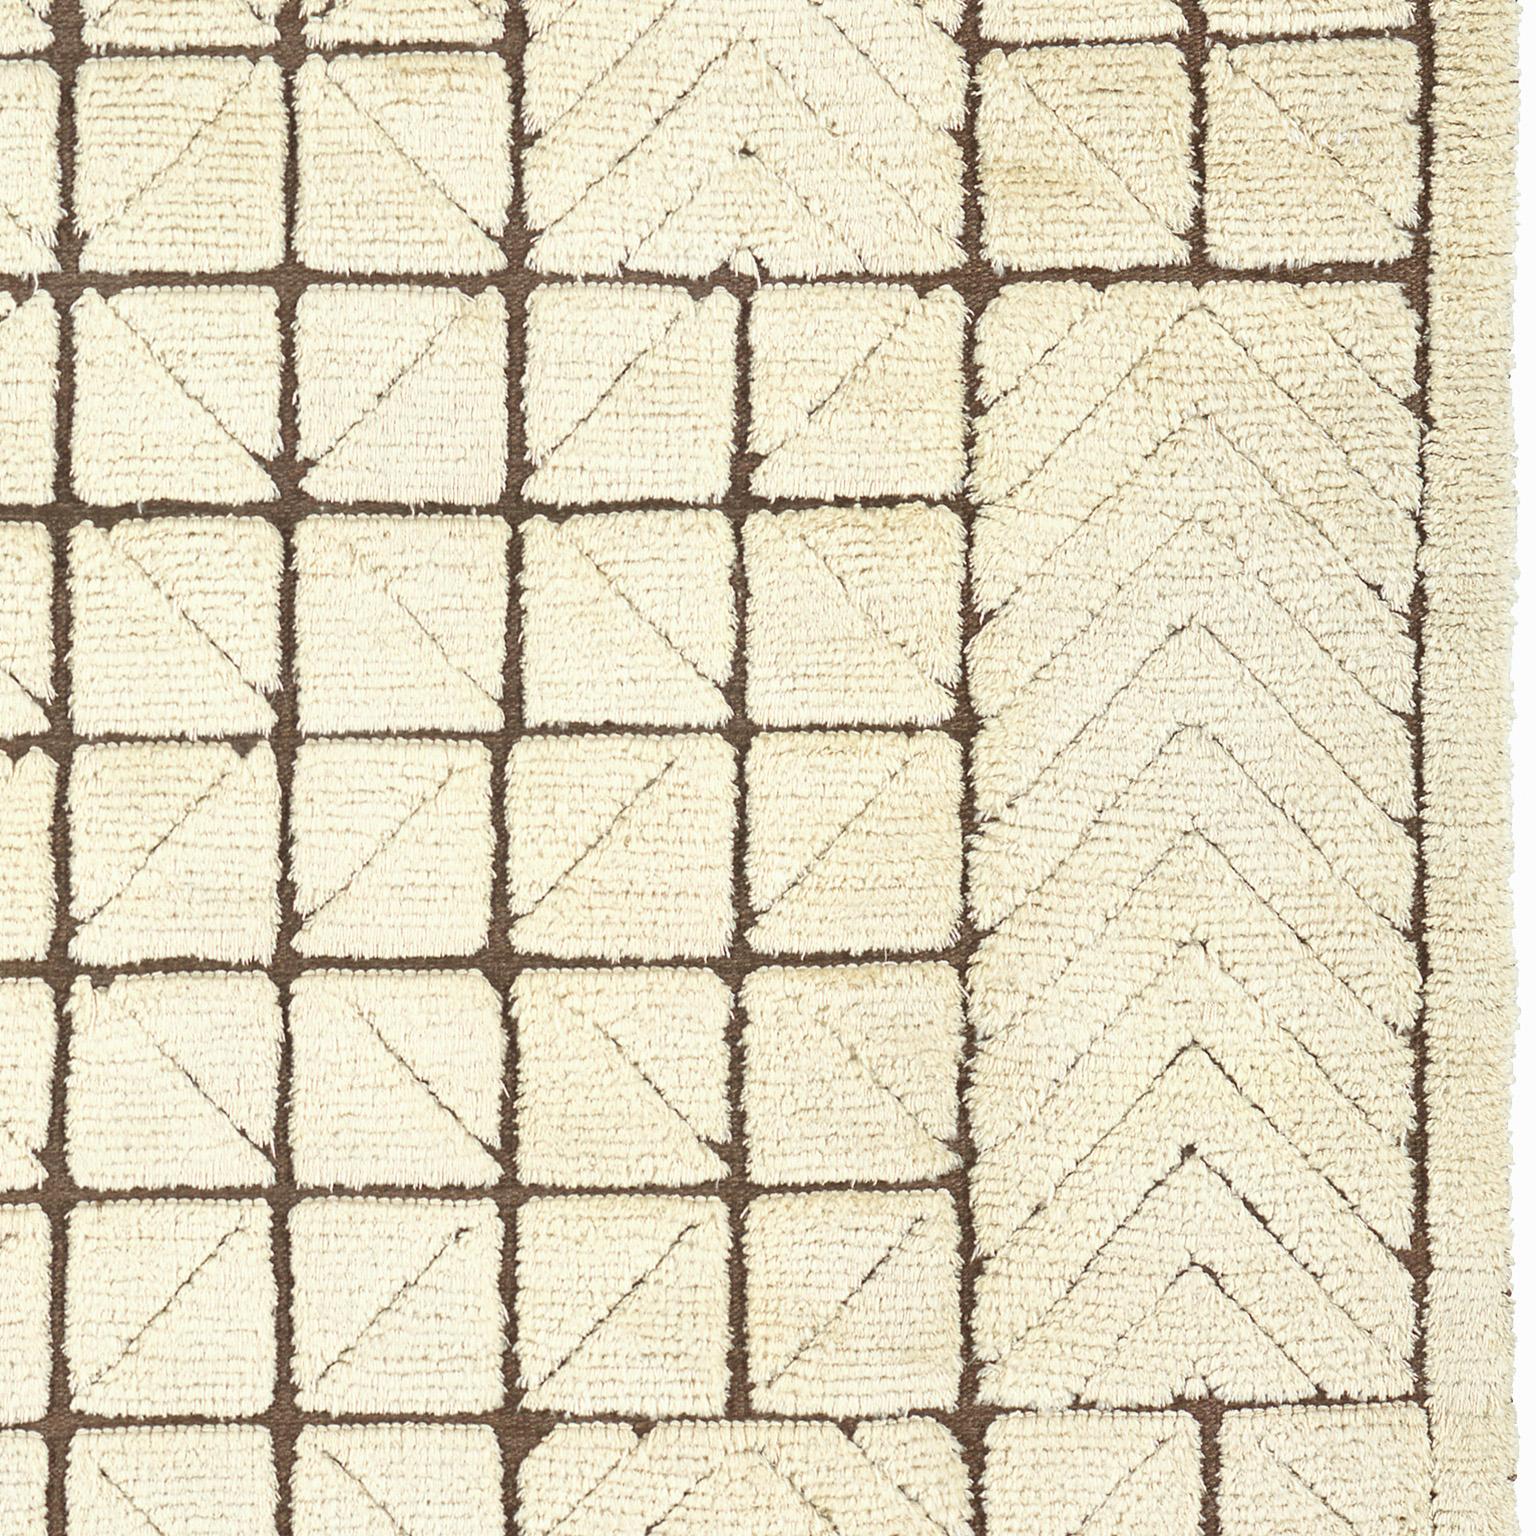 Hand-Woven Mid-20th Century Swedish Relief Pile Rug by Ingrid Hellman–Knafve For Sale